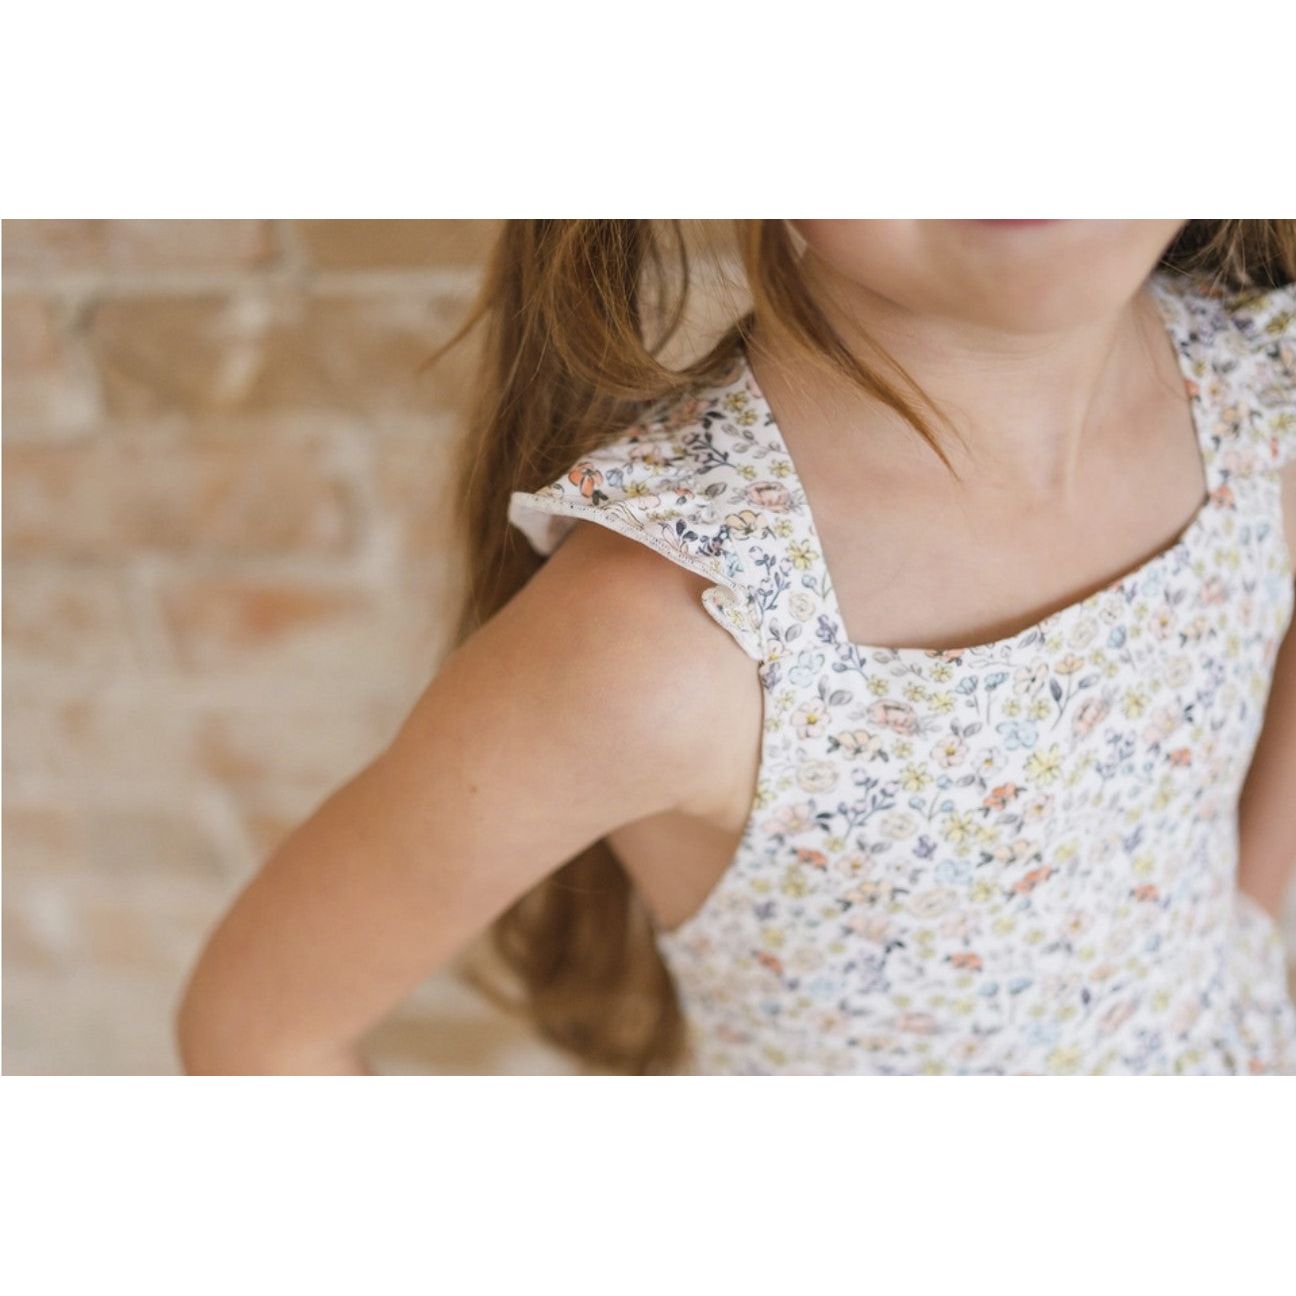 up close of girl wearing white twirl dress with flutter sleeves and floral print